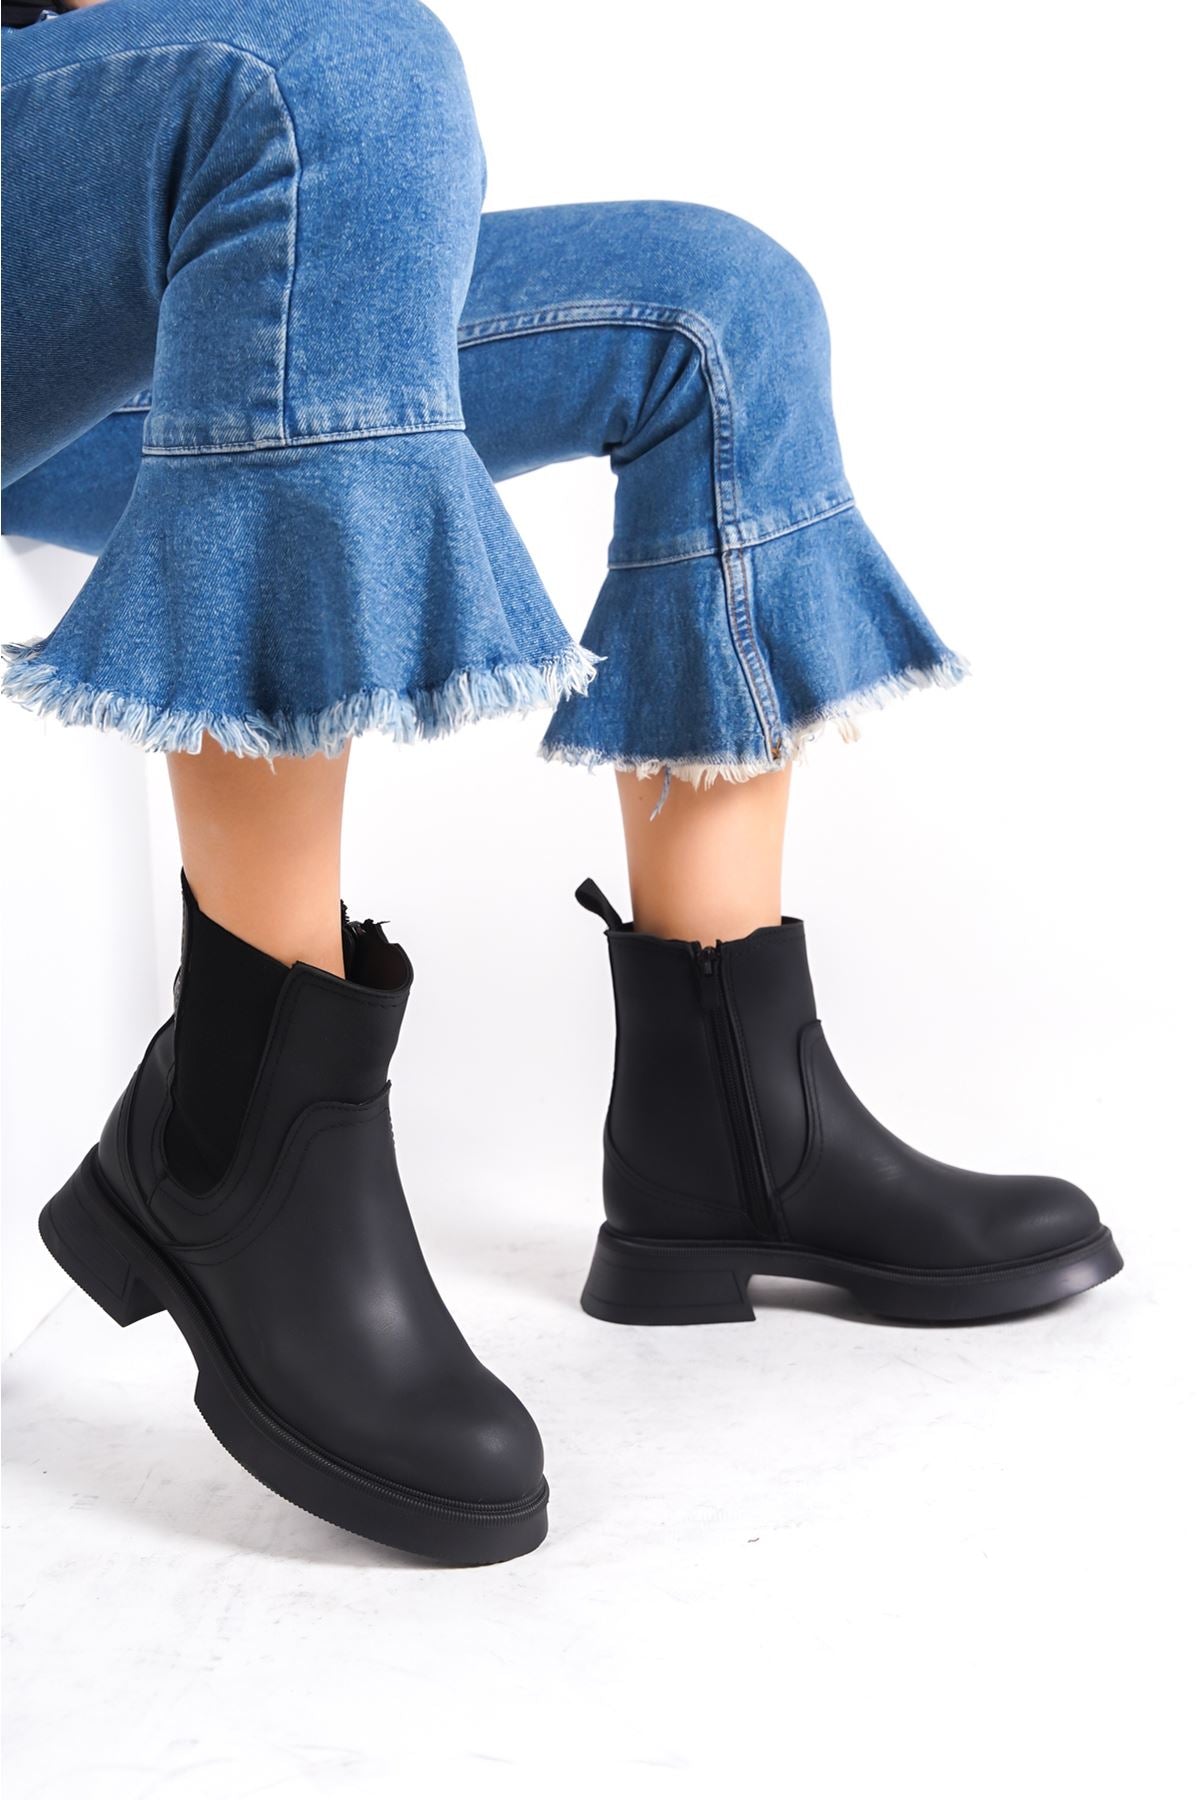 Dalpa Black Women's Boots with Elastic Sides - STREETMODE ™